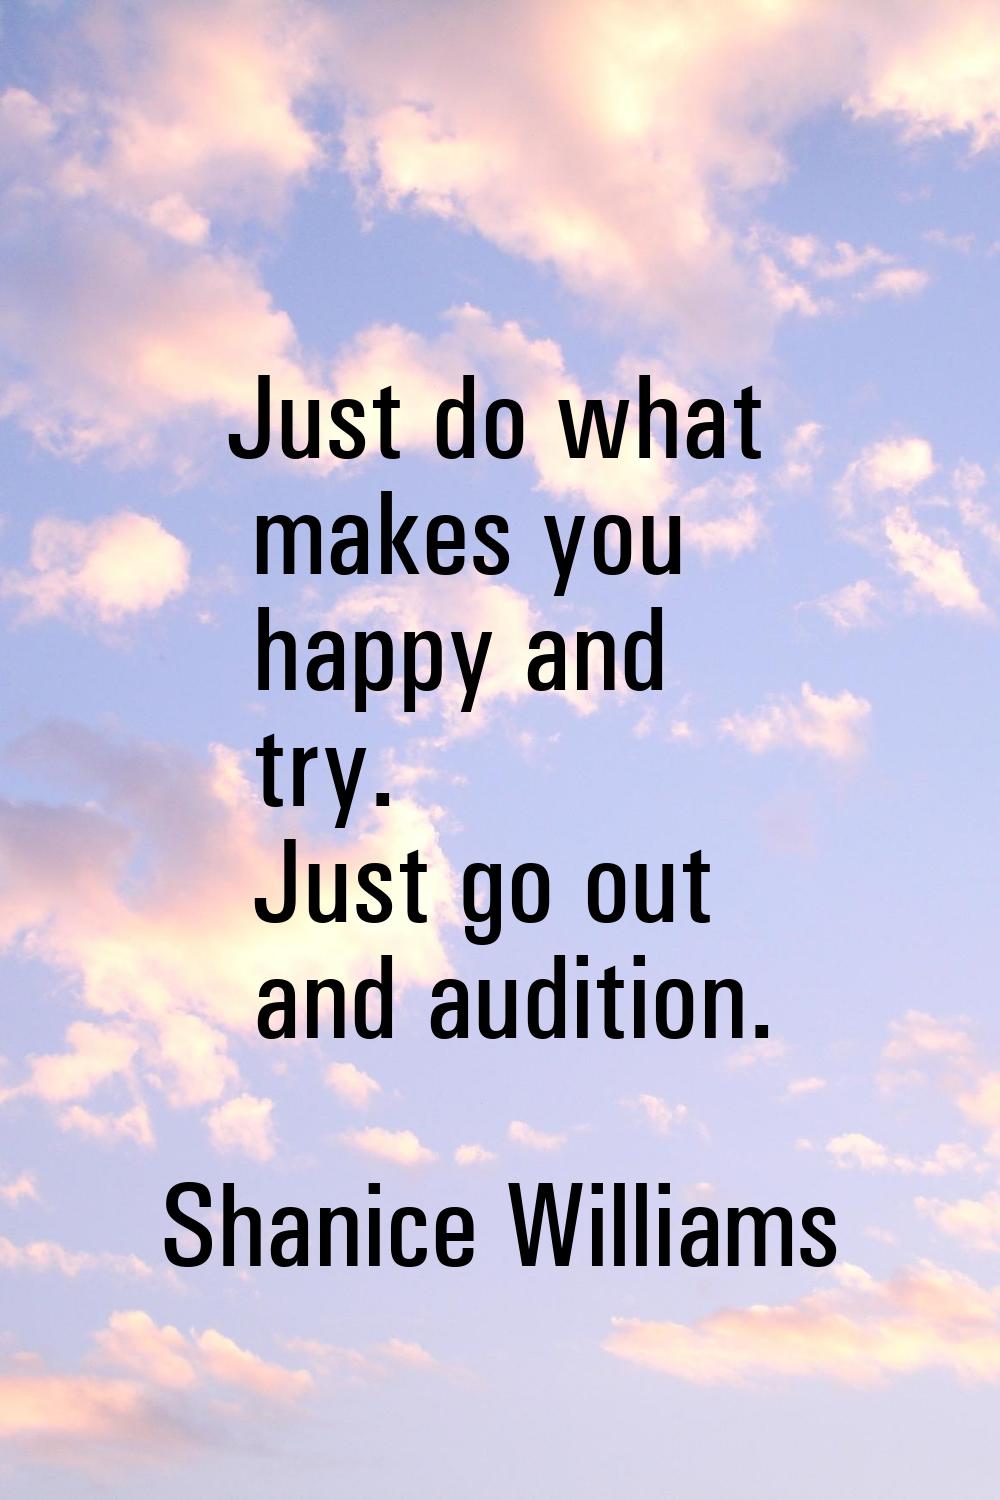 Just do what makes you happy and try. Just go out and audition.